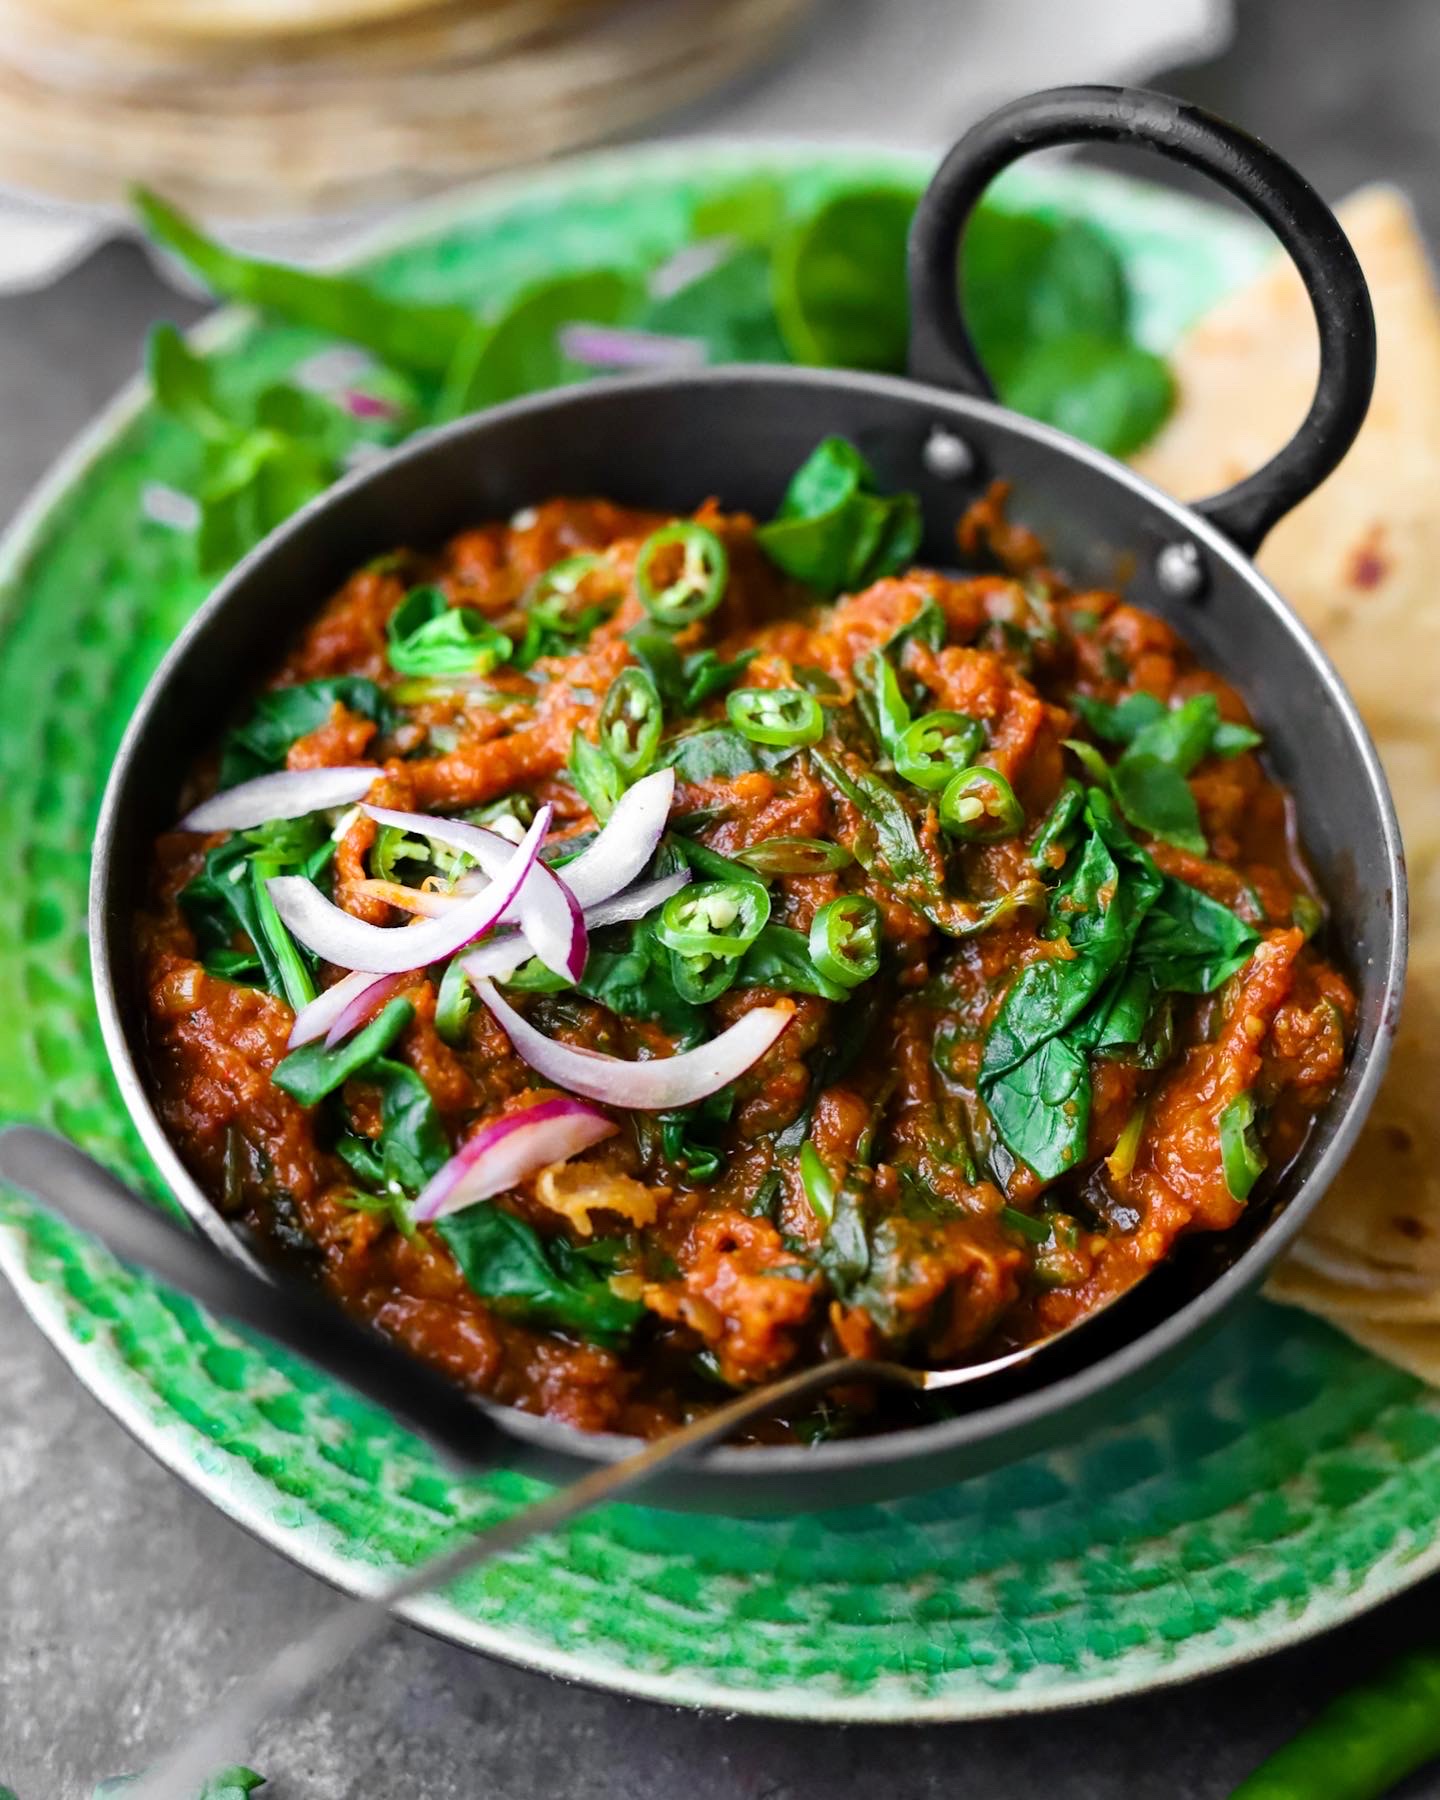 Melt-in-the-Mouth Burnt Aubergine and Spinach Curry